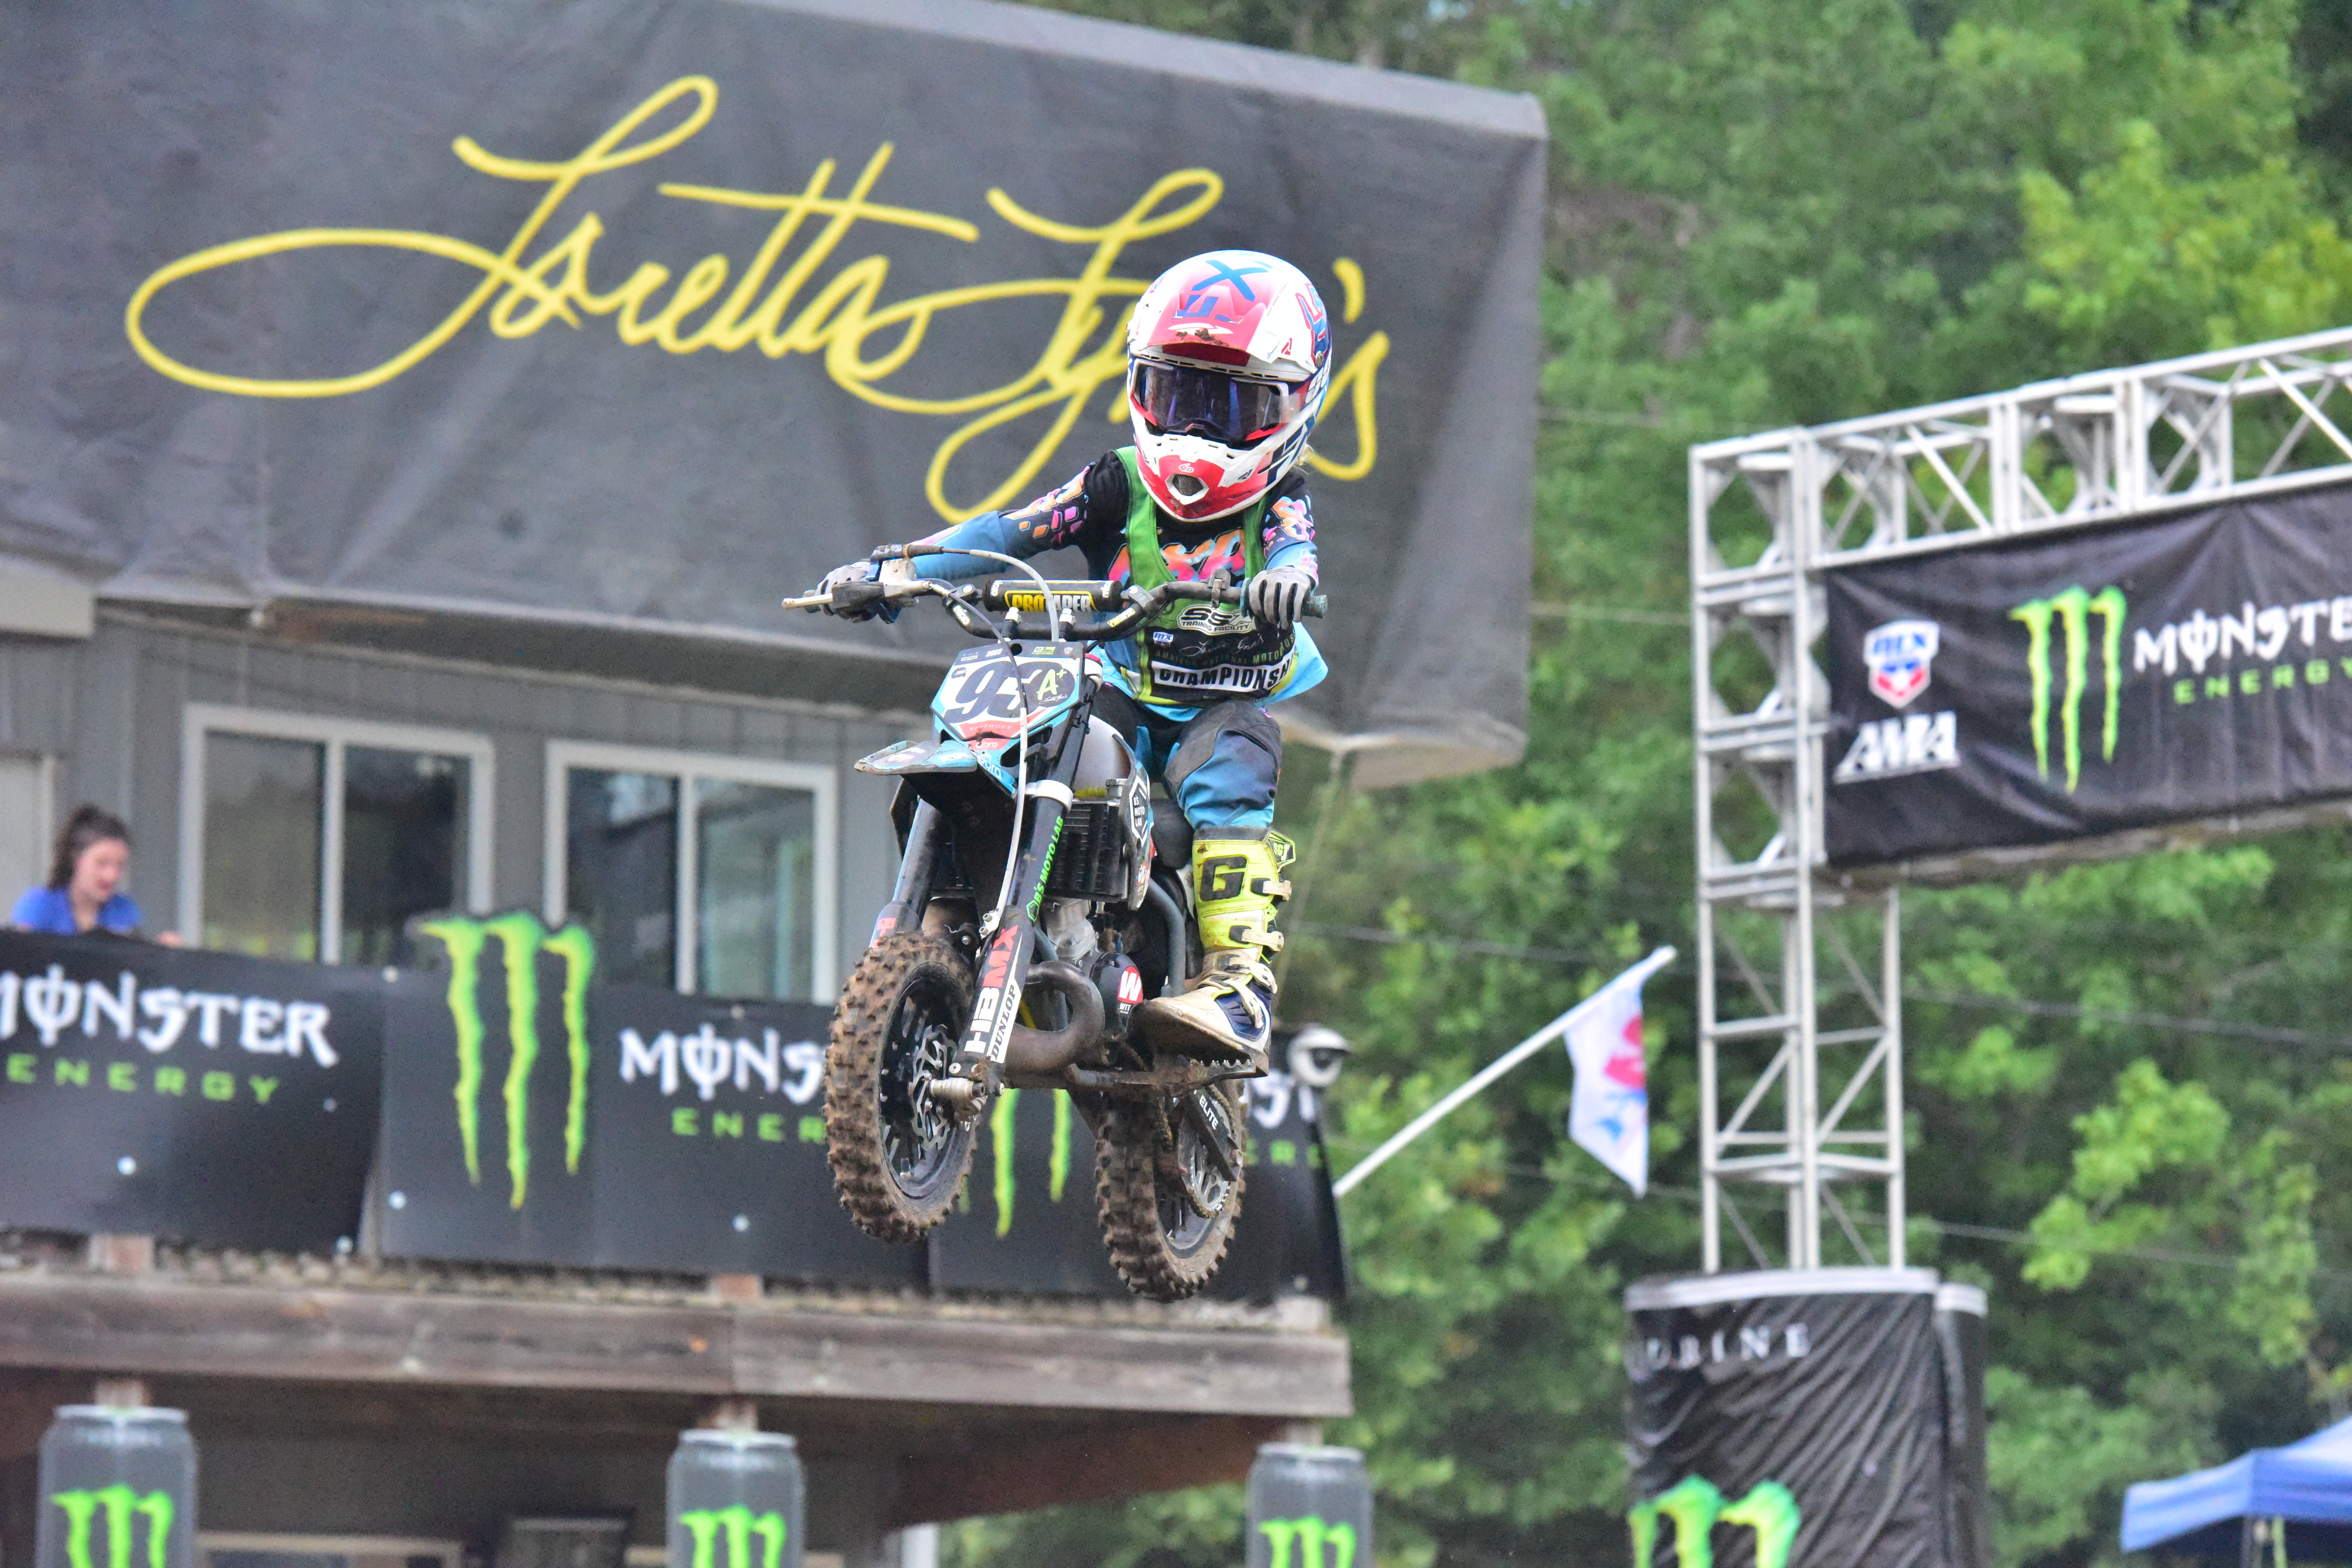 Motocross Sterling 7-year-old places 3rd at Loretta Lynns amateur nationals hq nude image